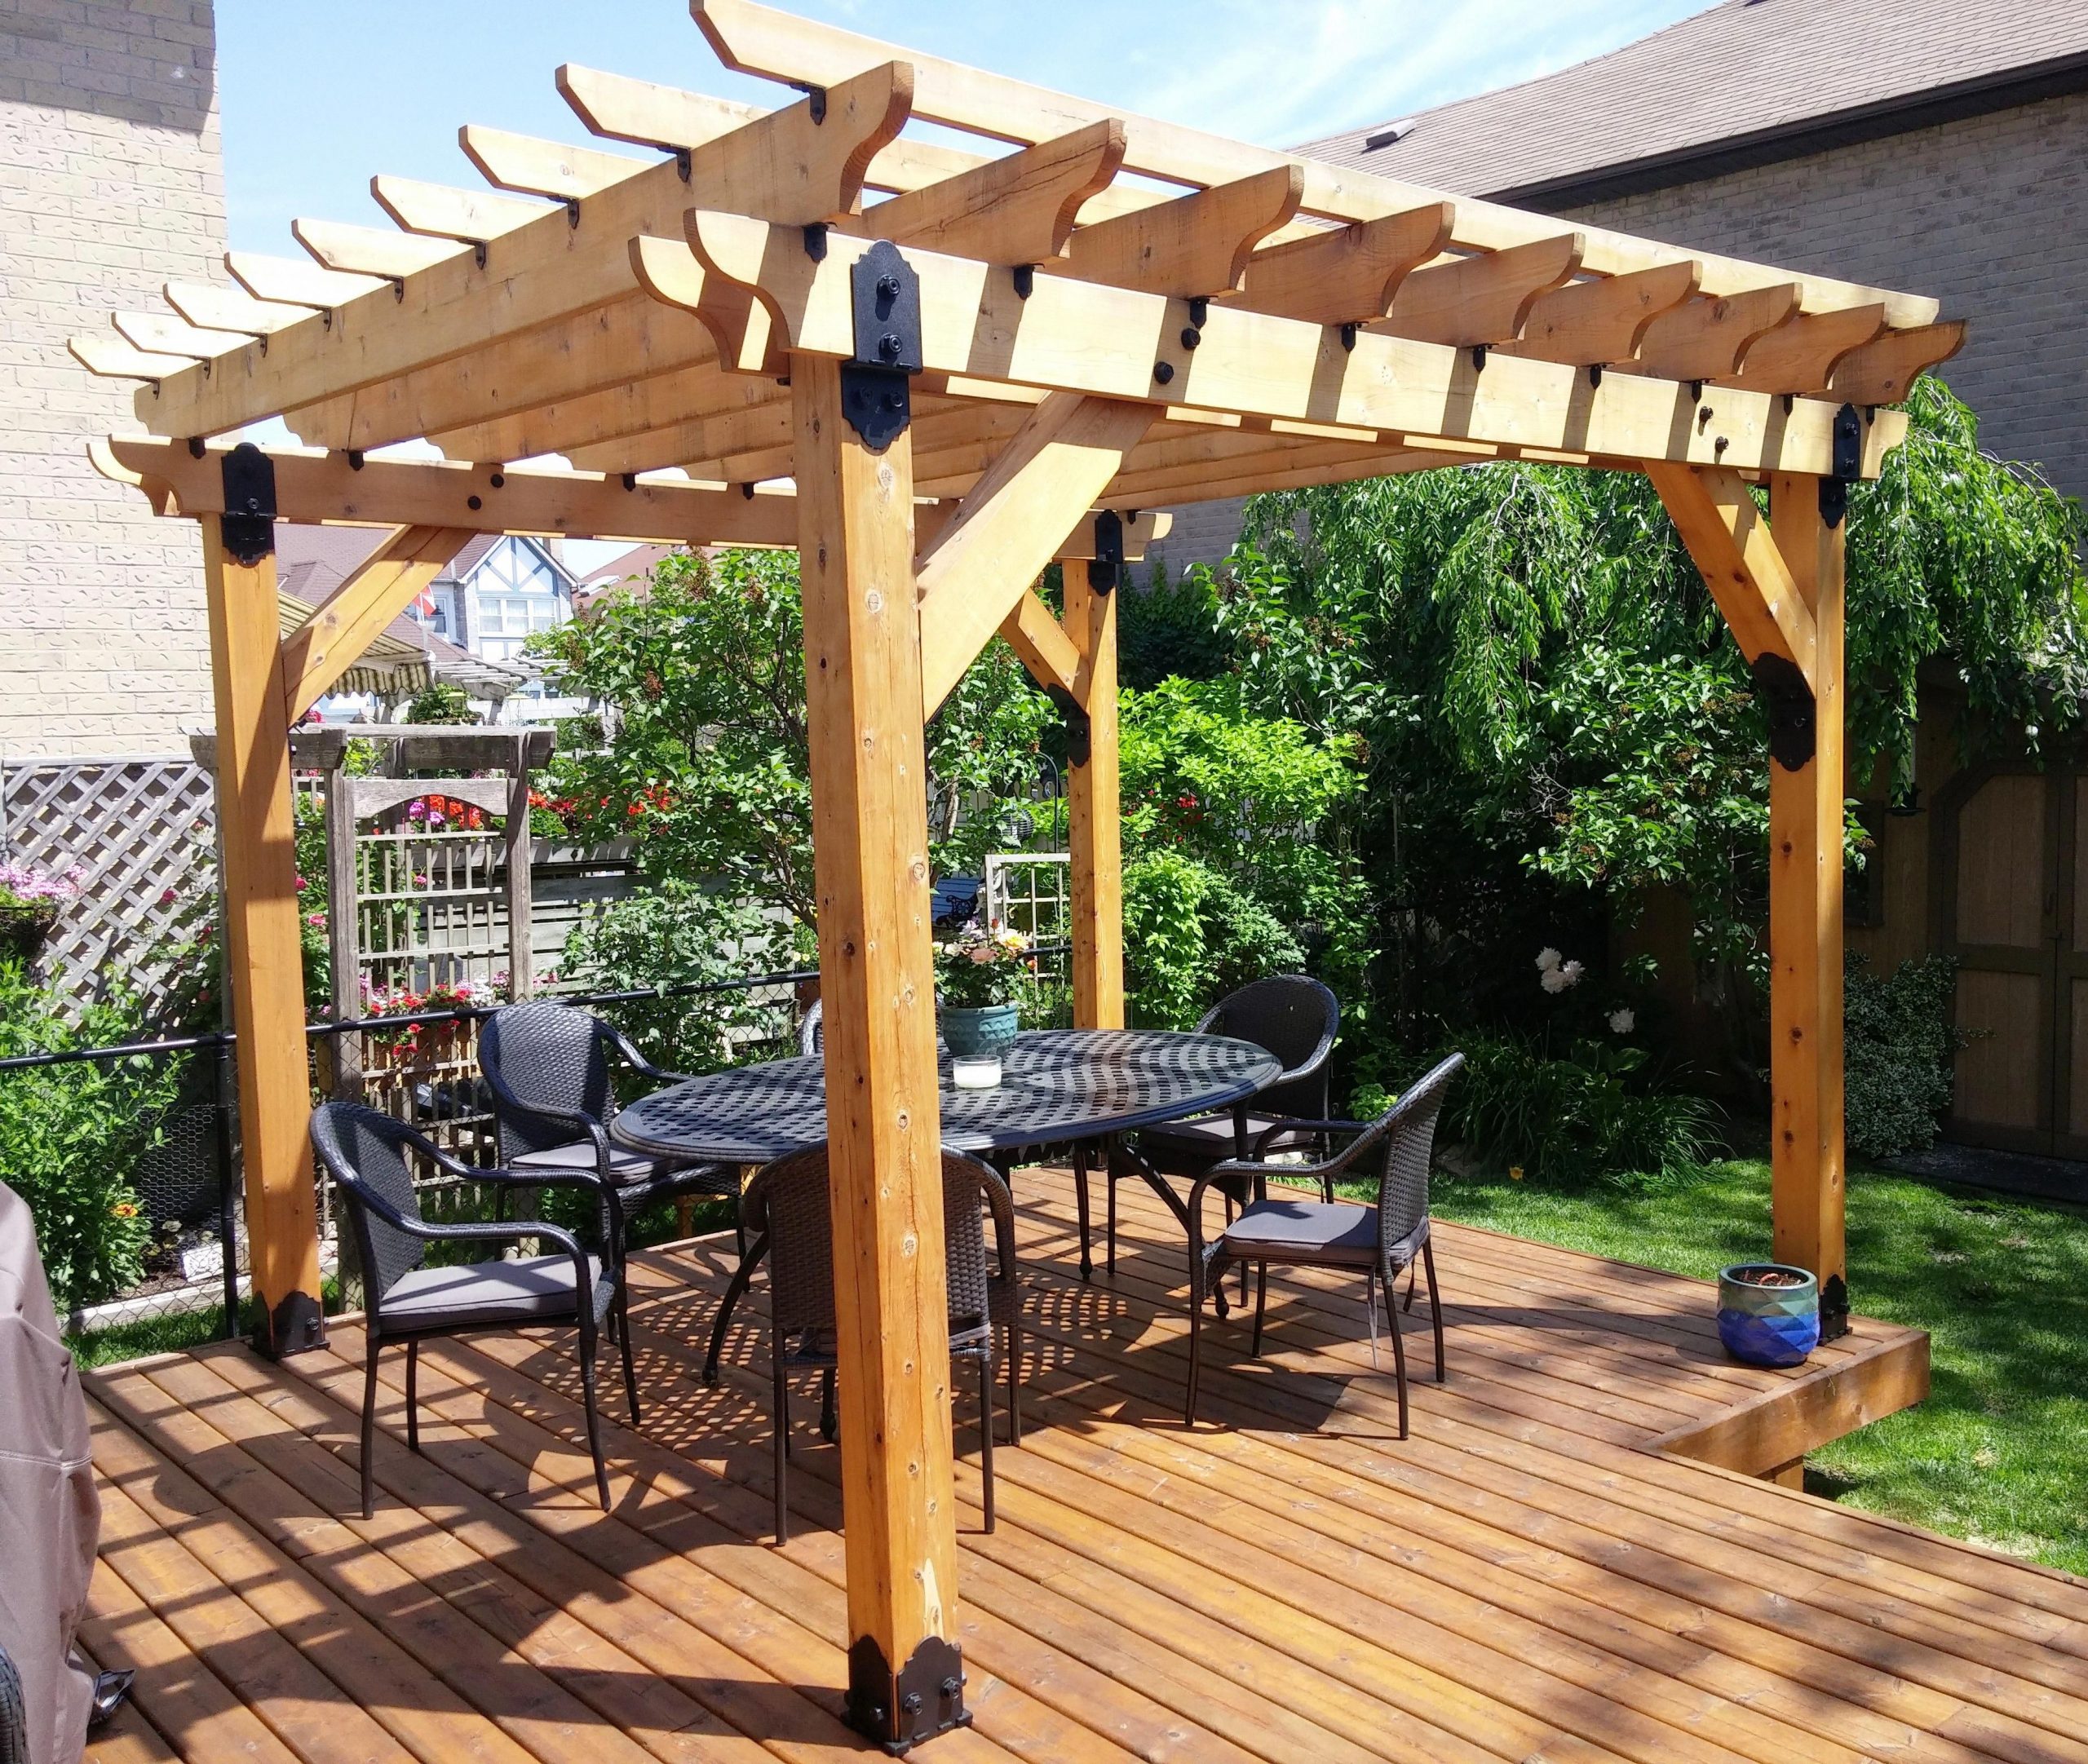 Help with from OZCO, you can build your own #OWTstanding pergola. Don